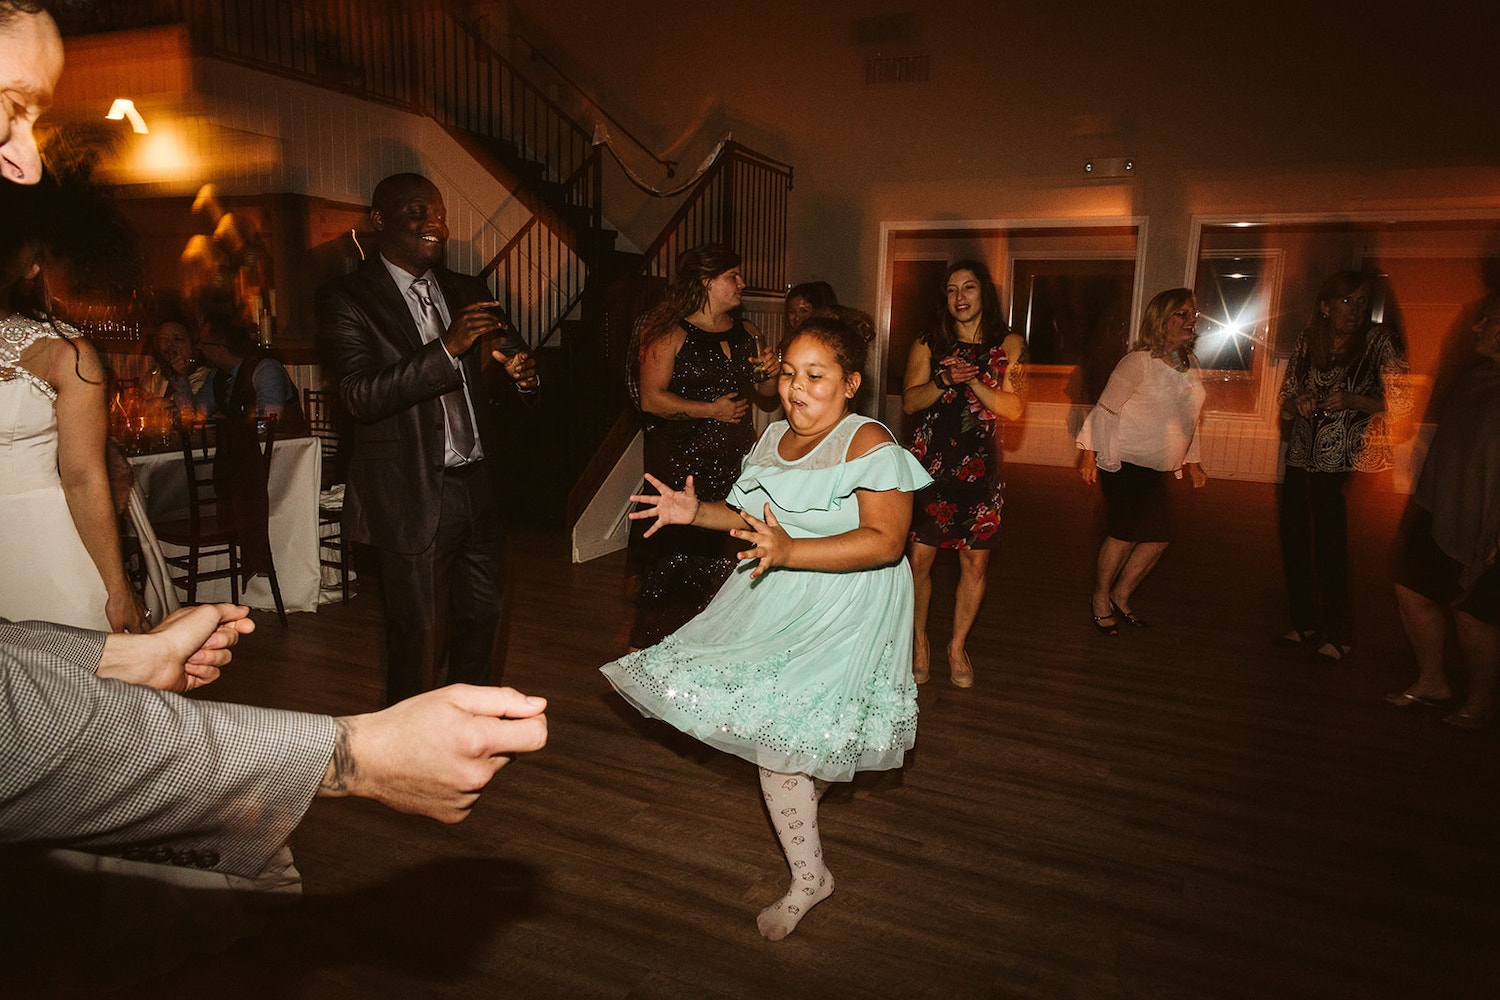 young girl dances in a twirling light green dress